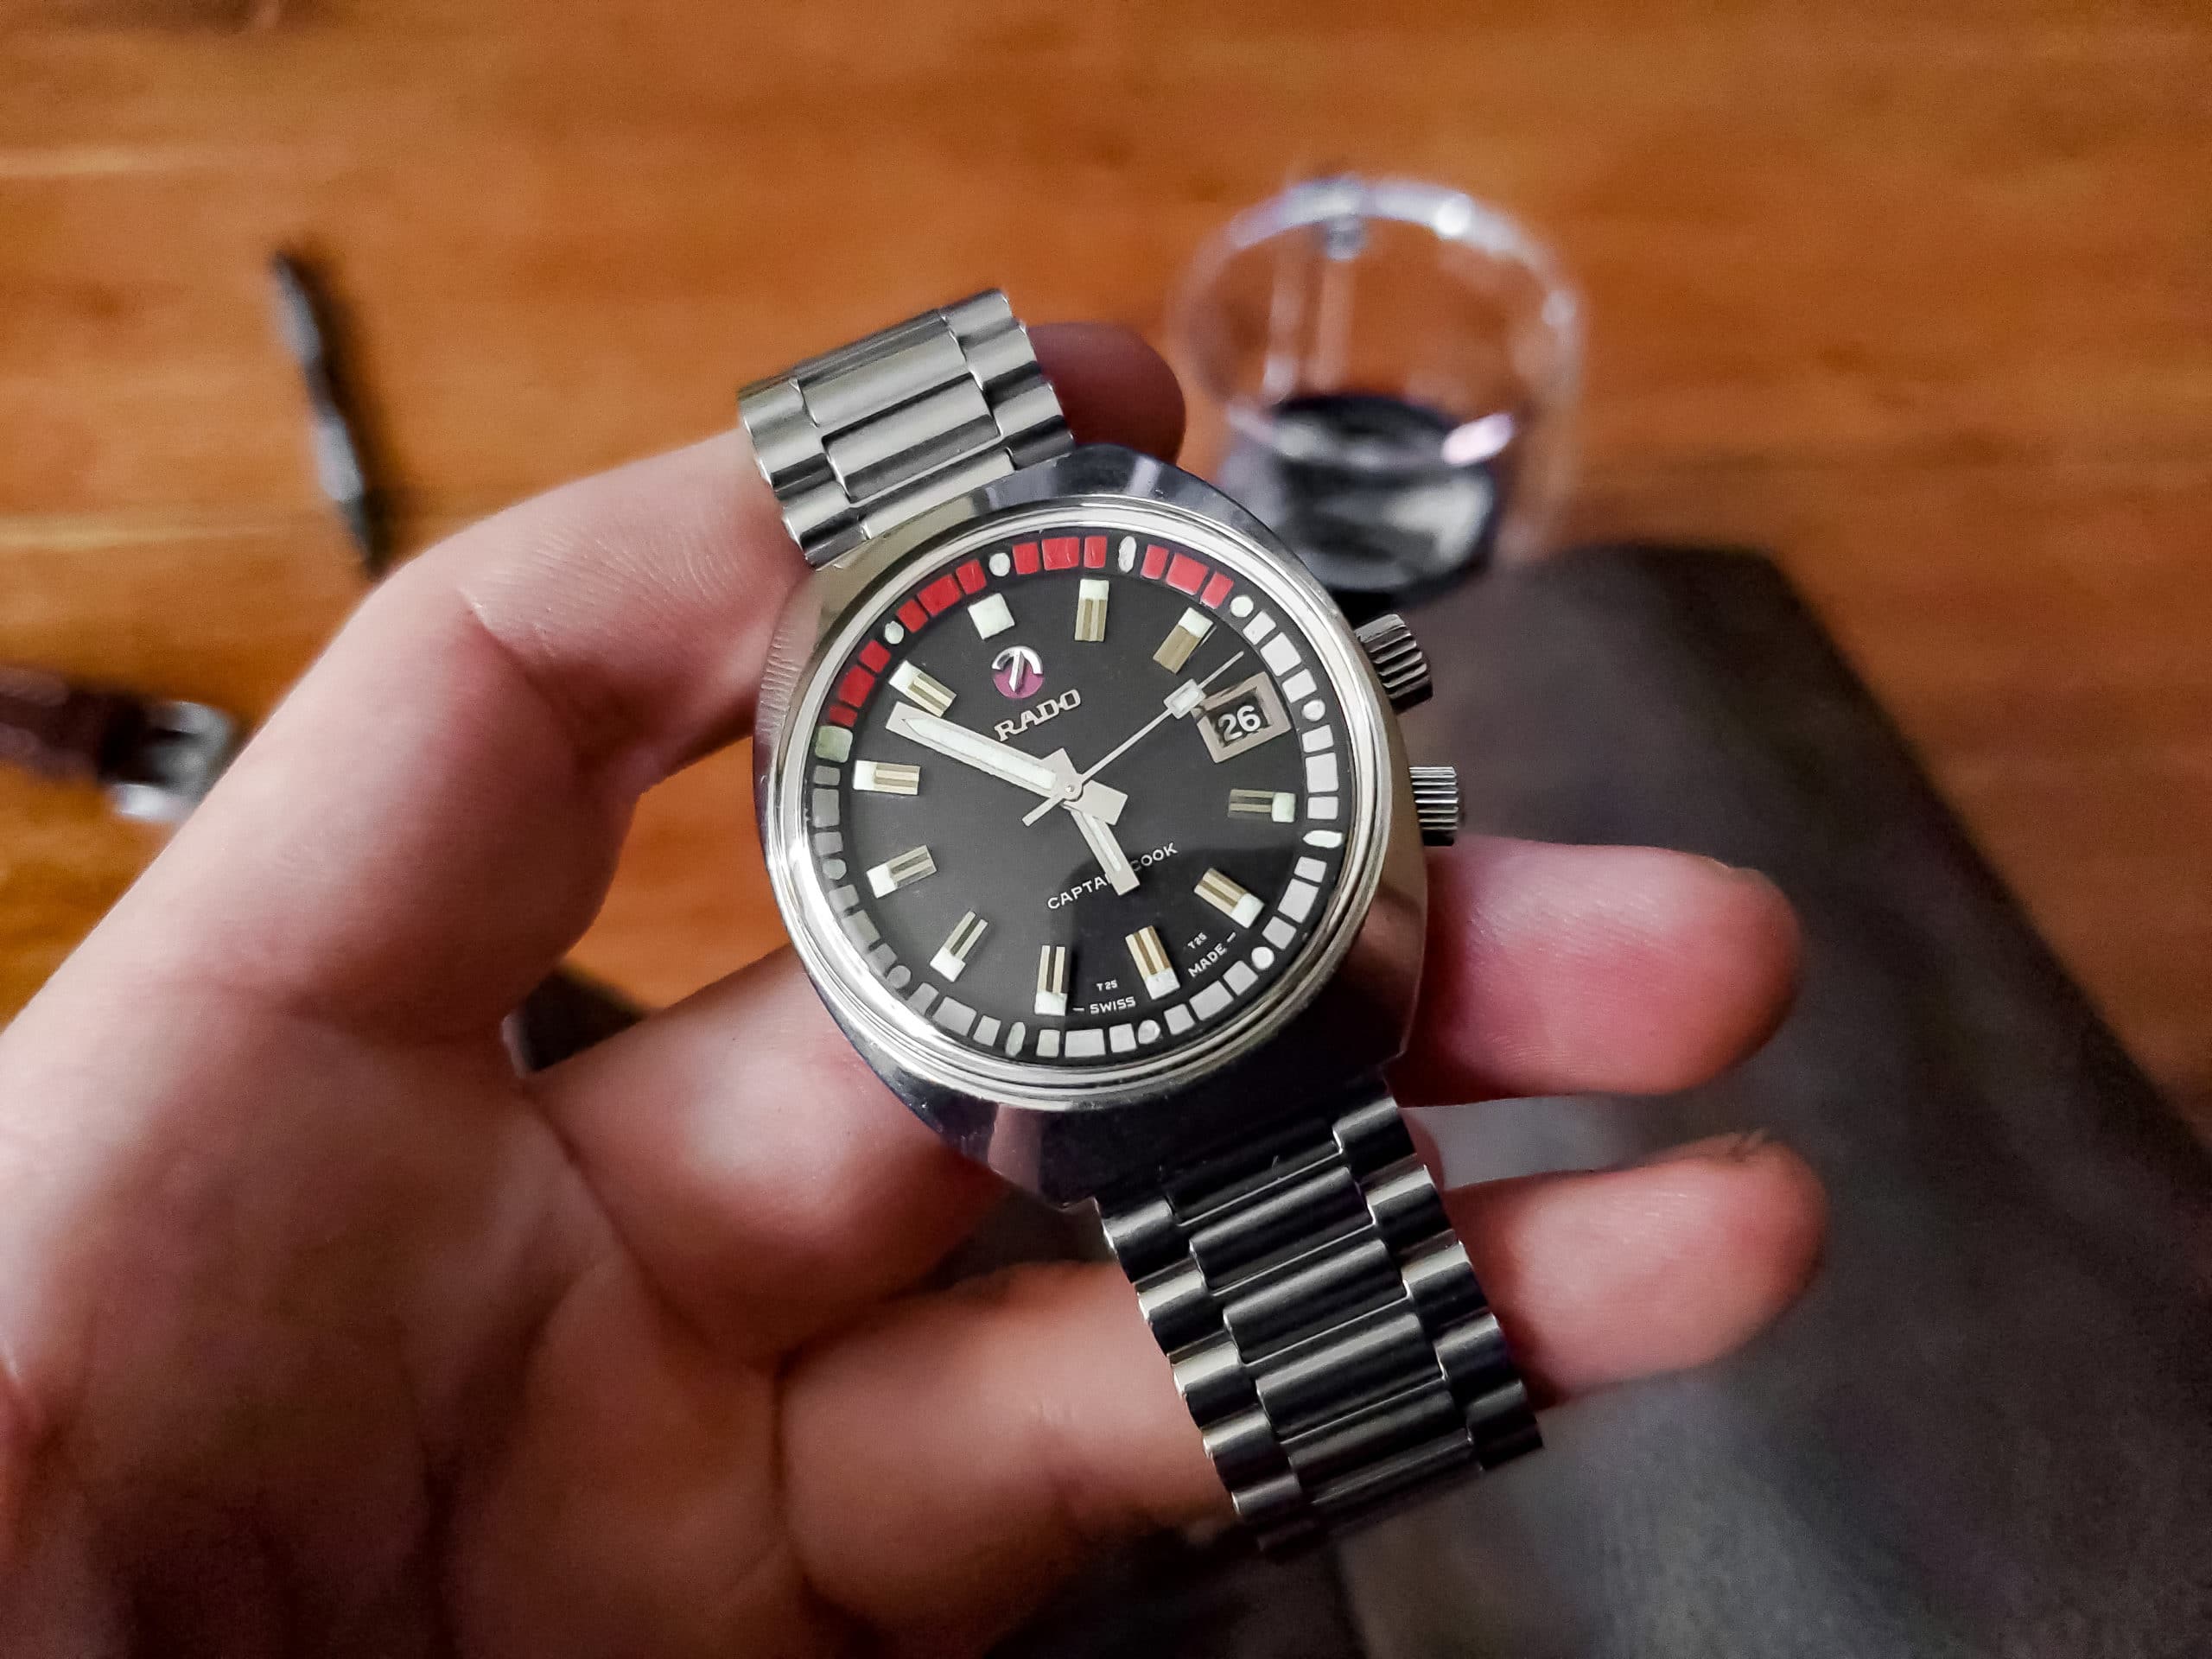 How To Start A Watch Collection For $200 (That You Can Be Proud Of!)